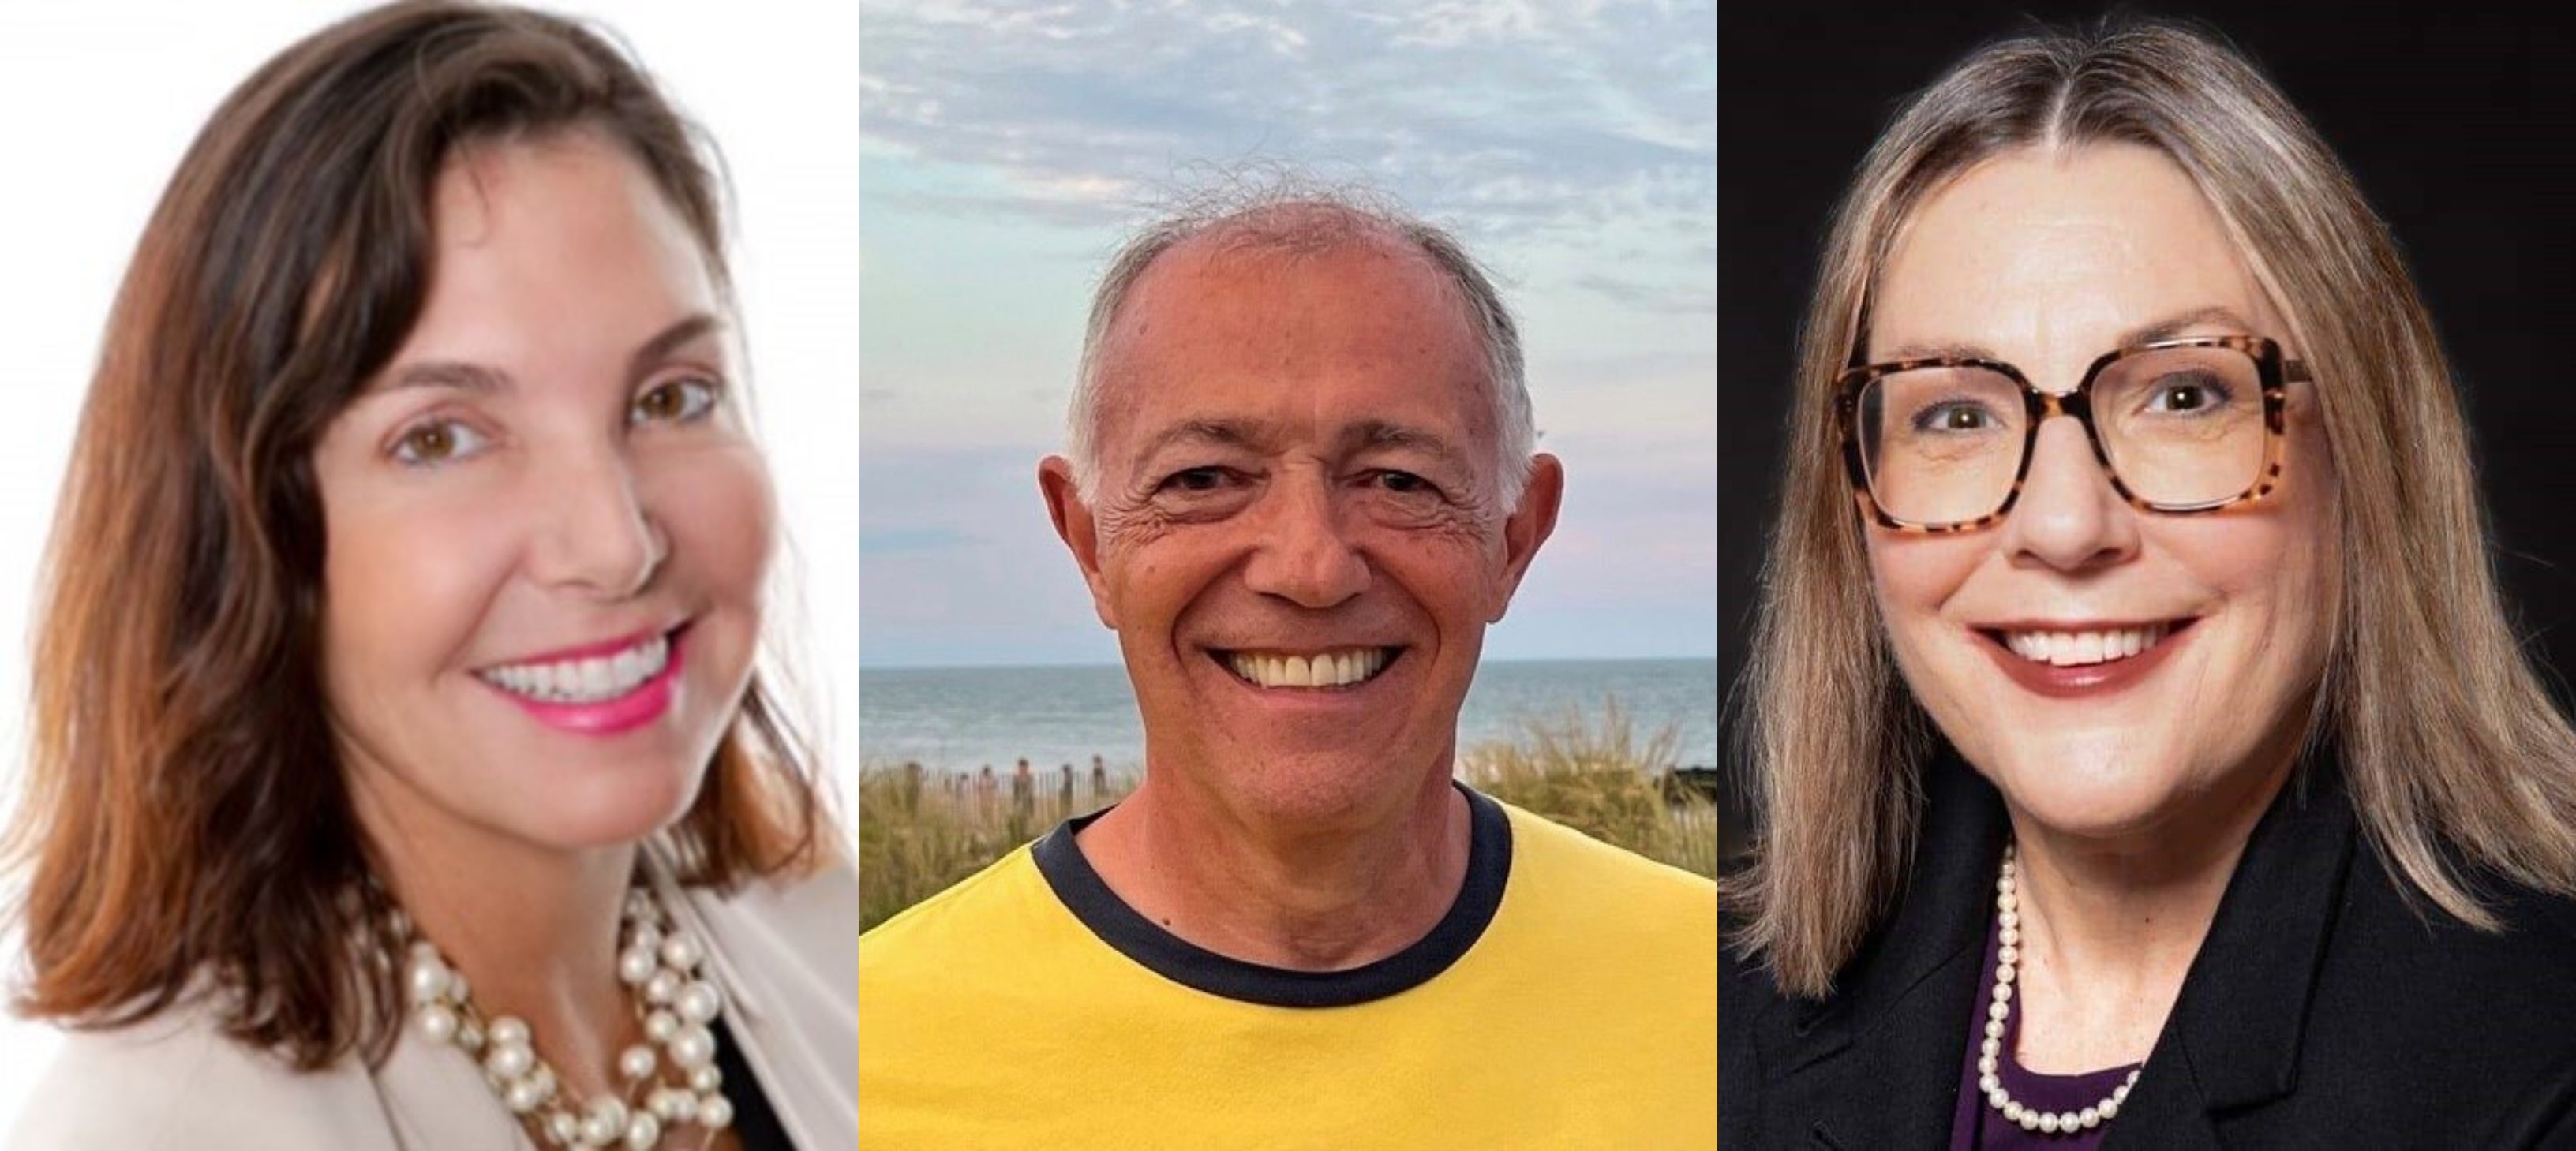 Kathy McGuiness, Marty Rendon and Claire Snyder-Hall